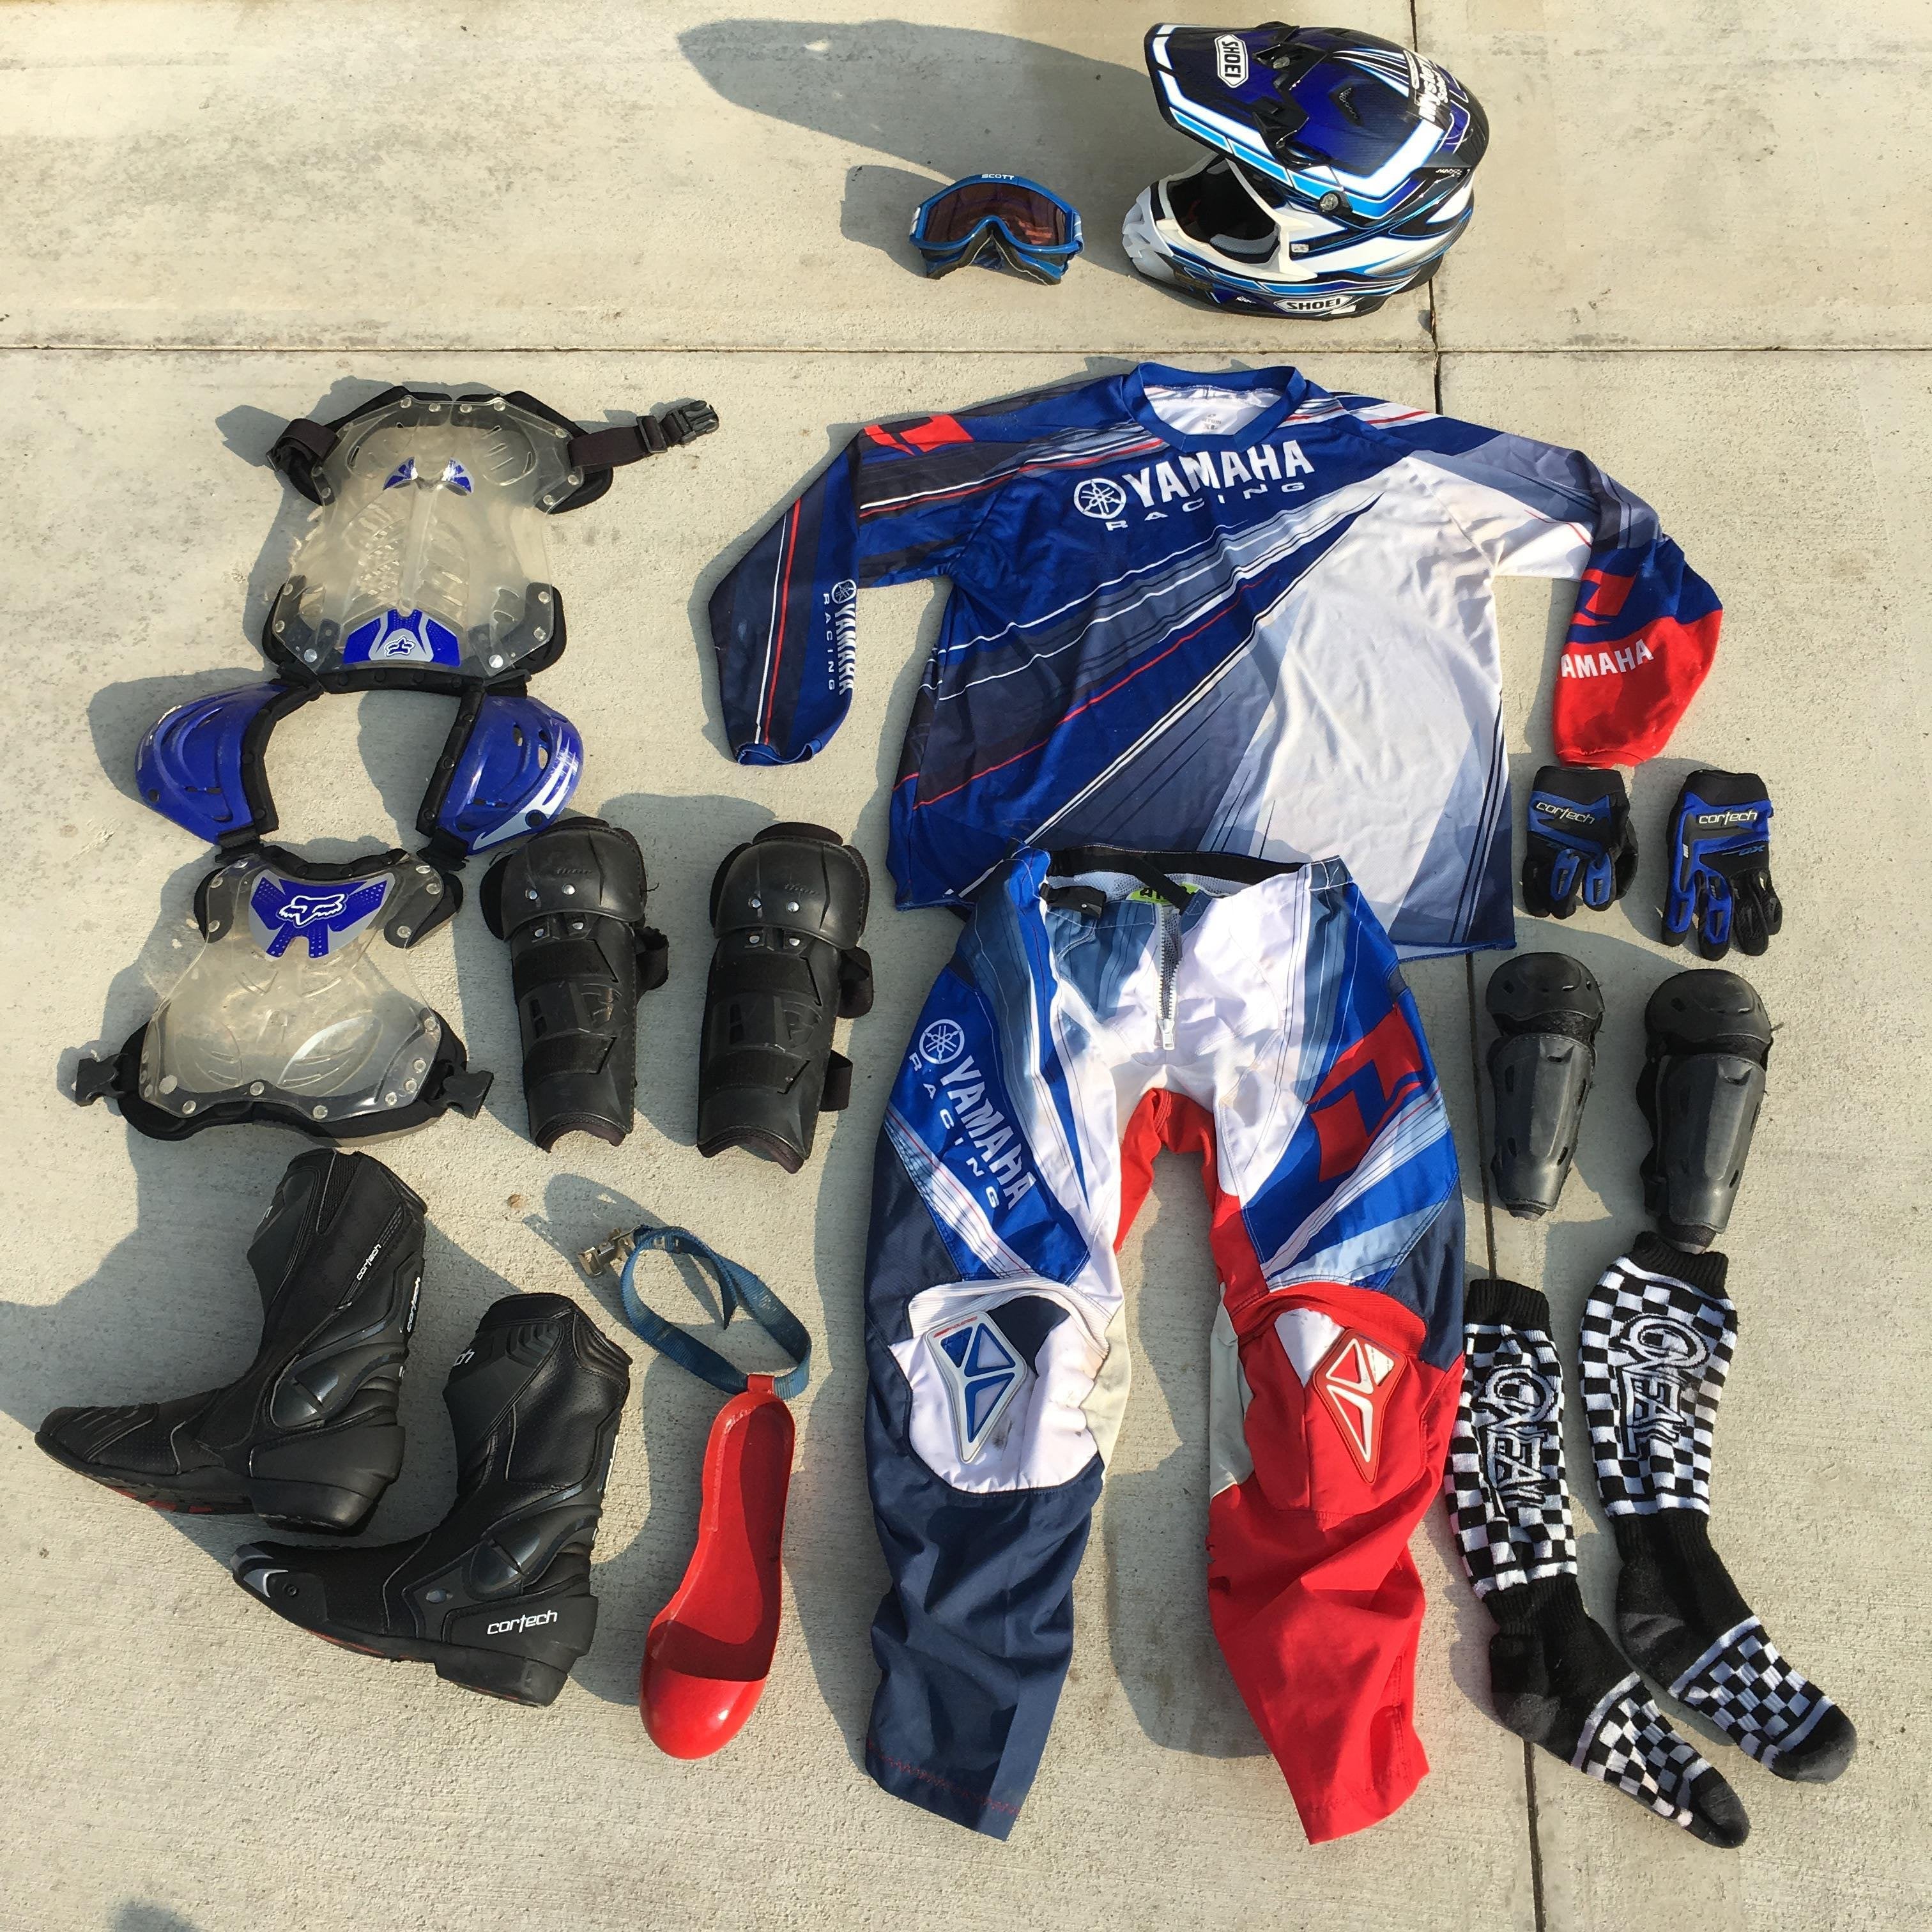 Kids Dirt Bike Motorcycle Riding Gear 4-6 Years Maybe For